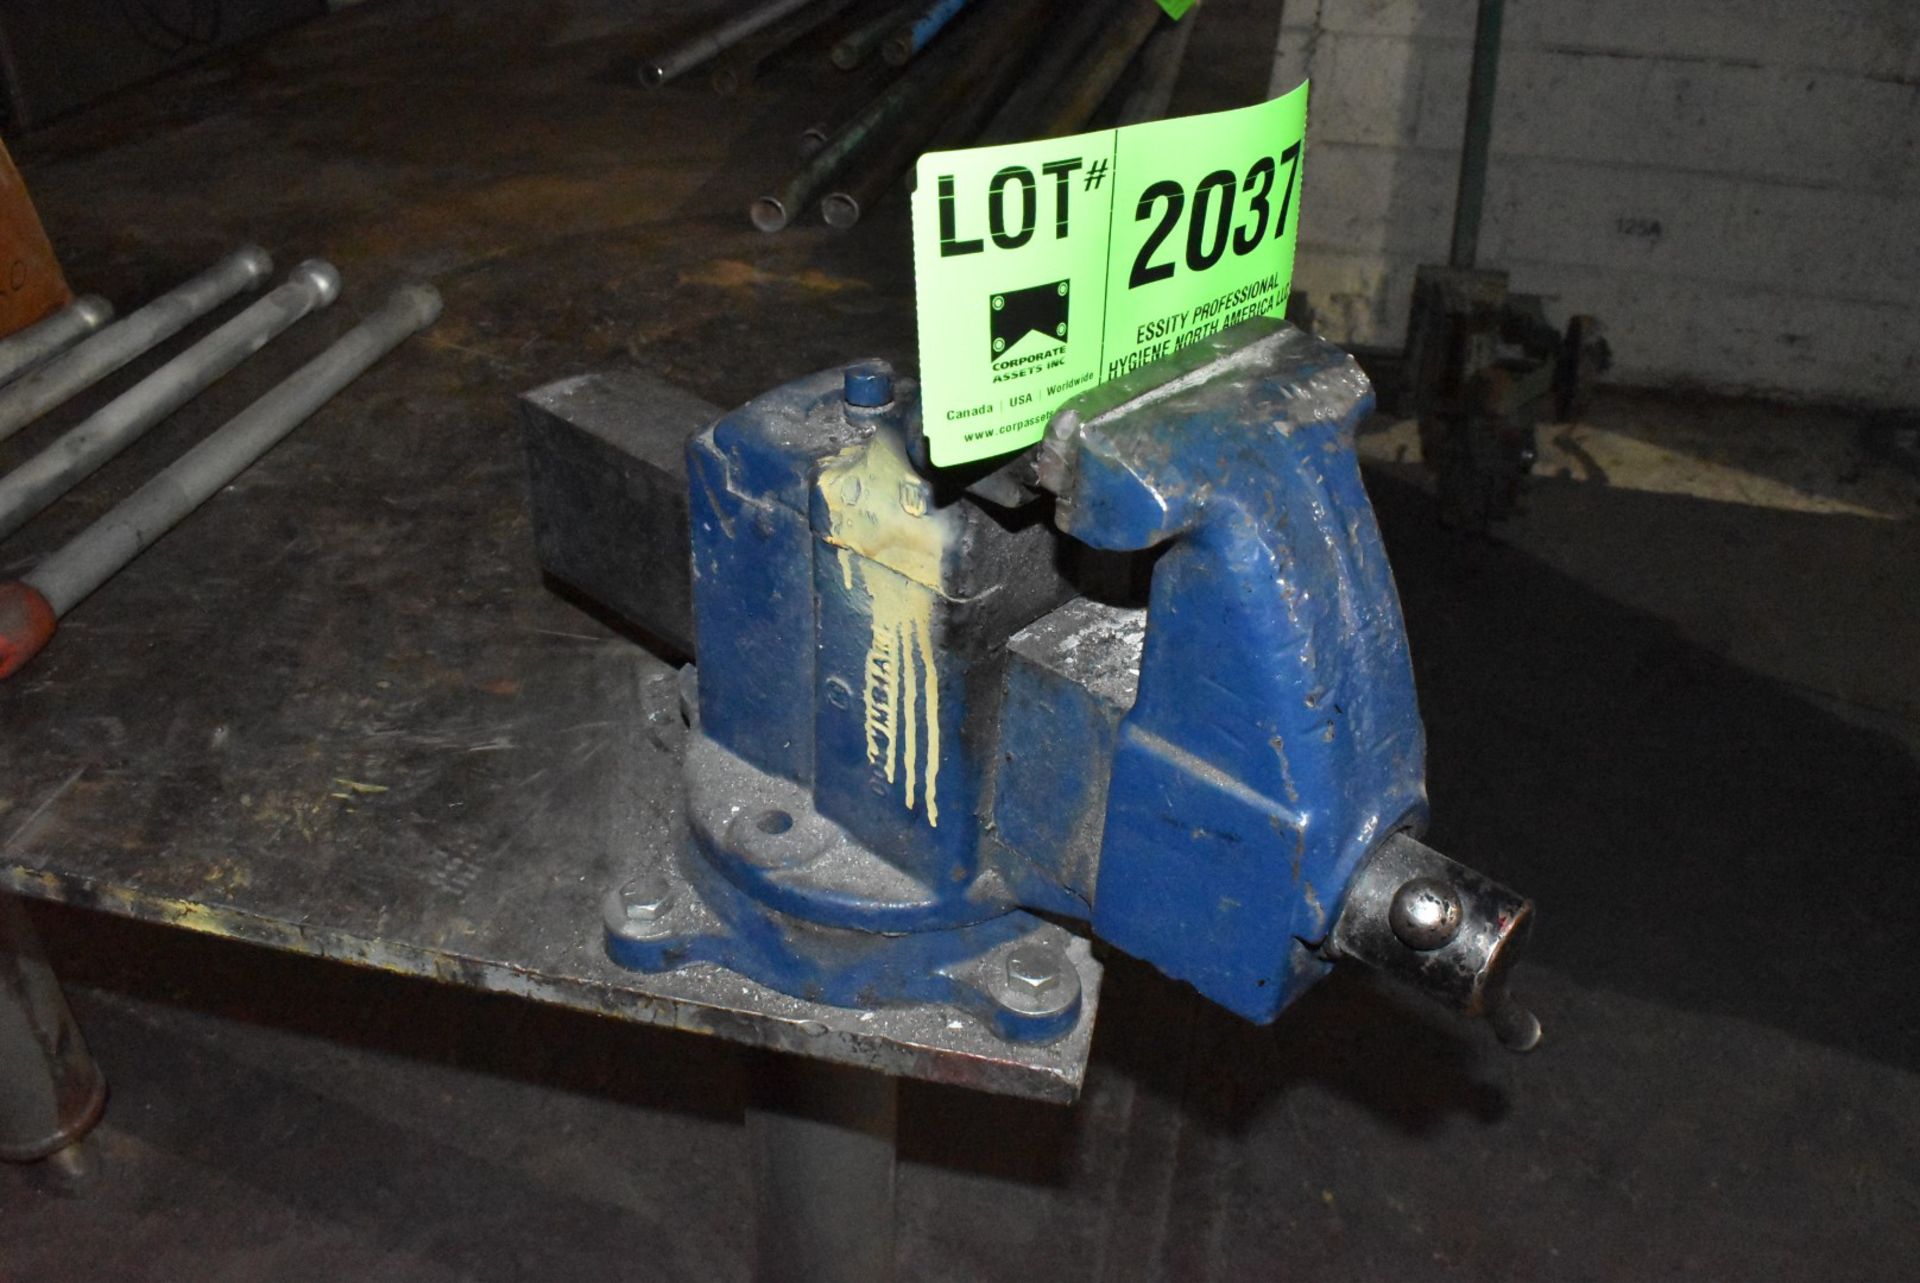 96" X 48" X .75" STEEL WELDING TABLE WITH 4.5" BENCH VISE (CI) [RIGGING FEES FOR LOT #2037 - $100 - Image 2 of 3